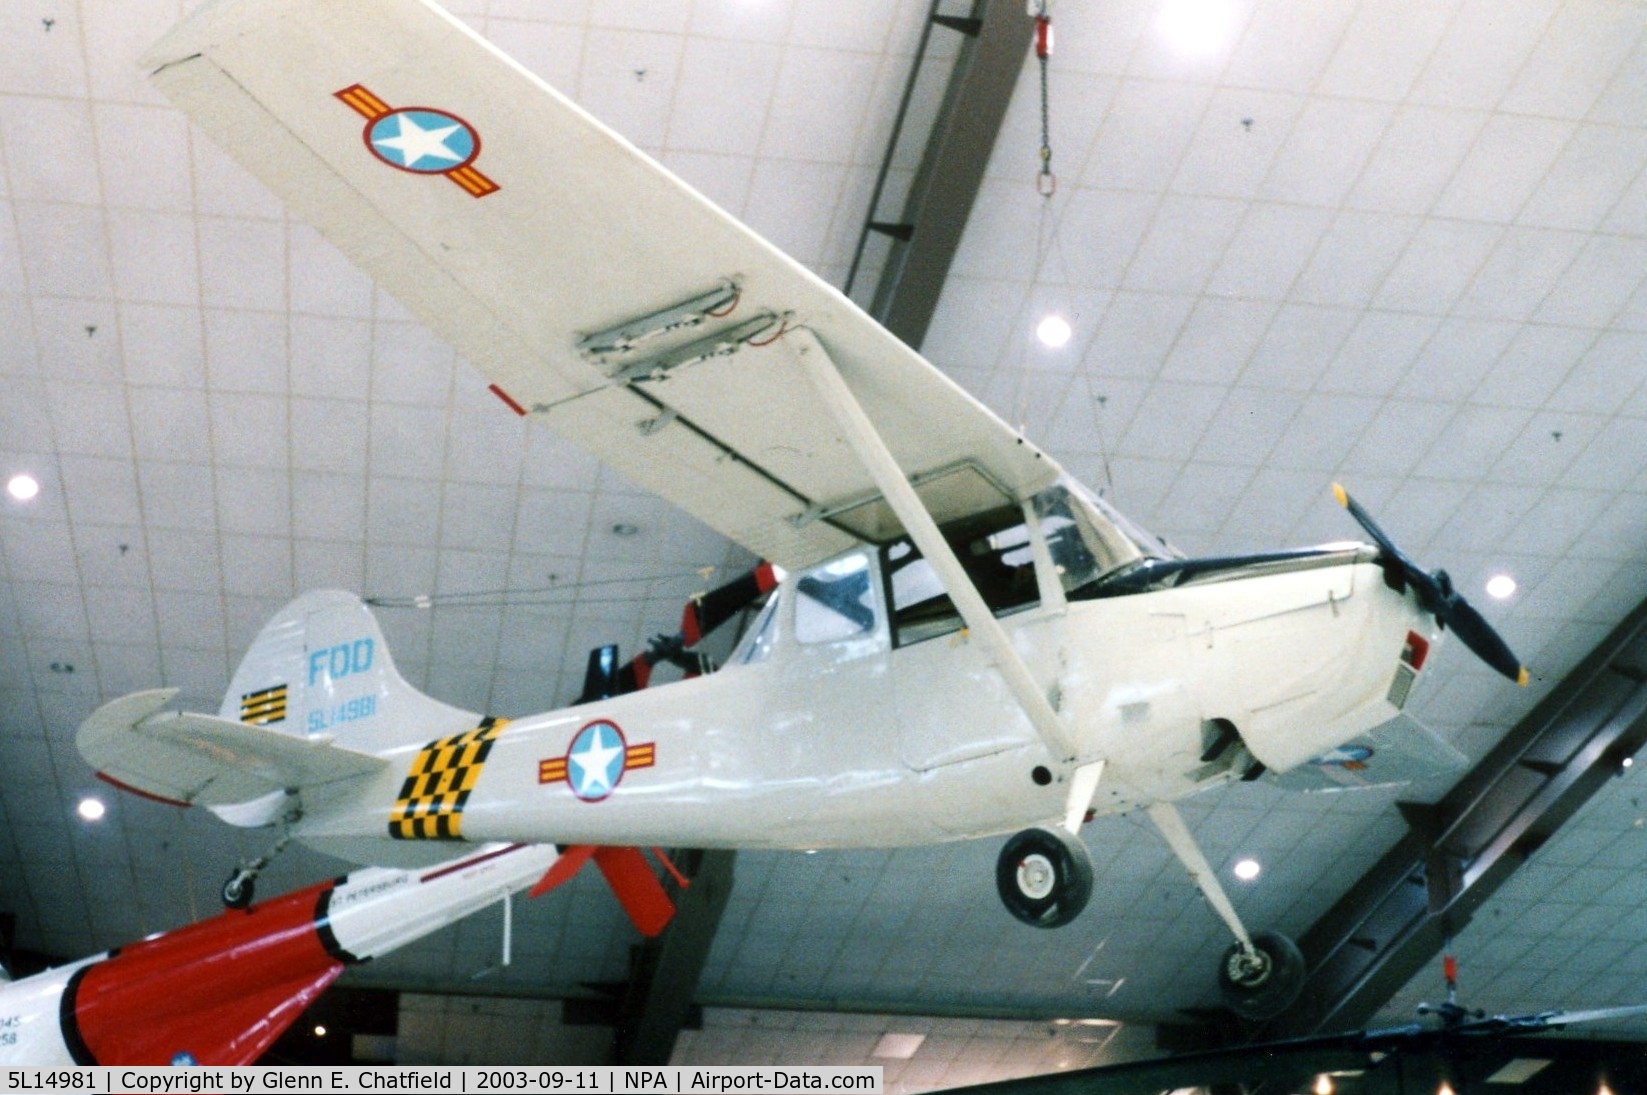 5L14981, 1950 Cessna O-1A Bird Dog C/N 21866, O-1A/L-19A at the National Museum of Naval Aviation.  This aircraft landed on an aircraft carrier.